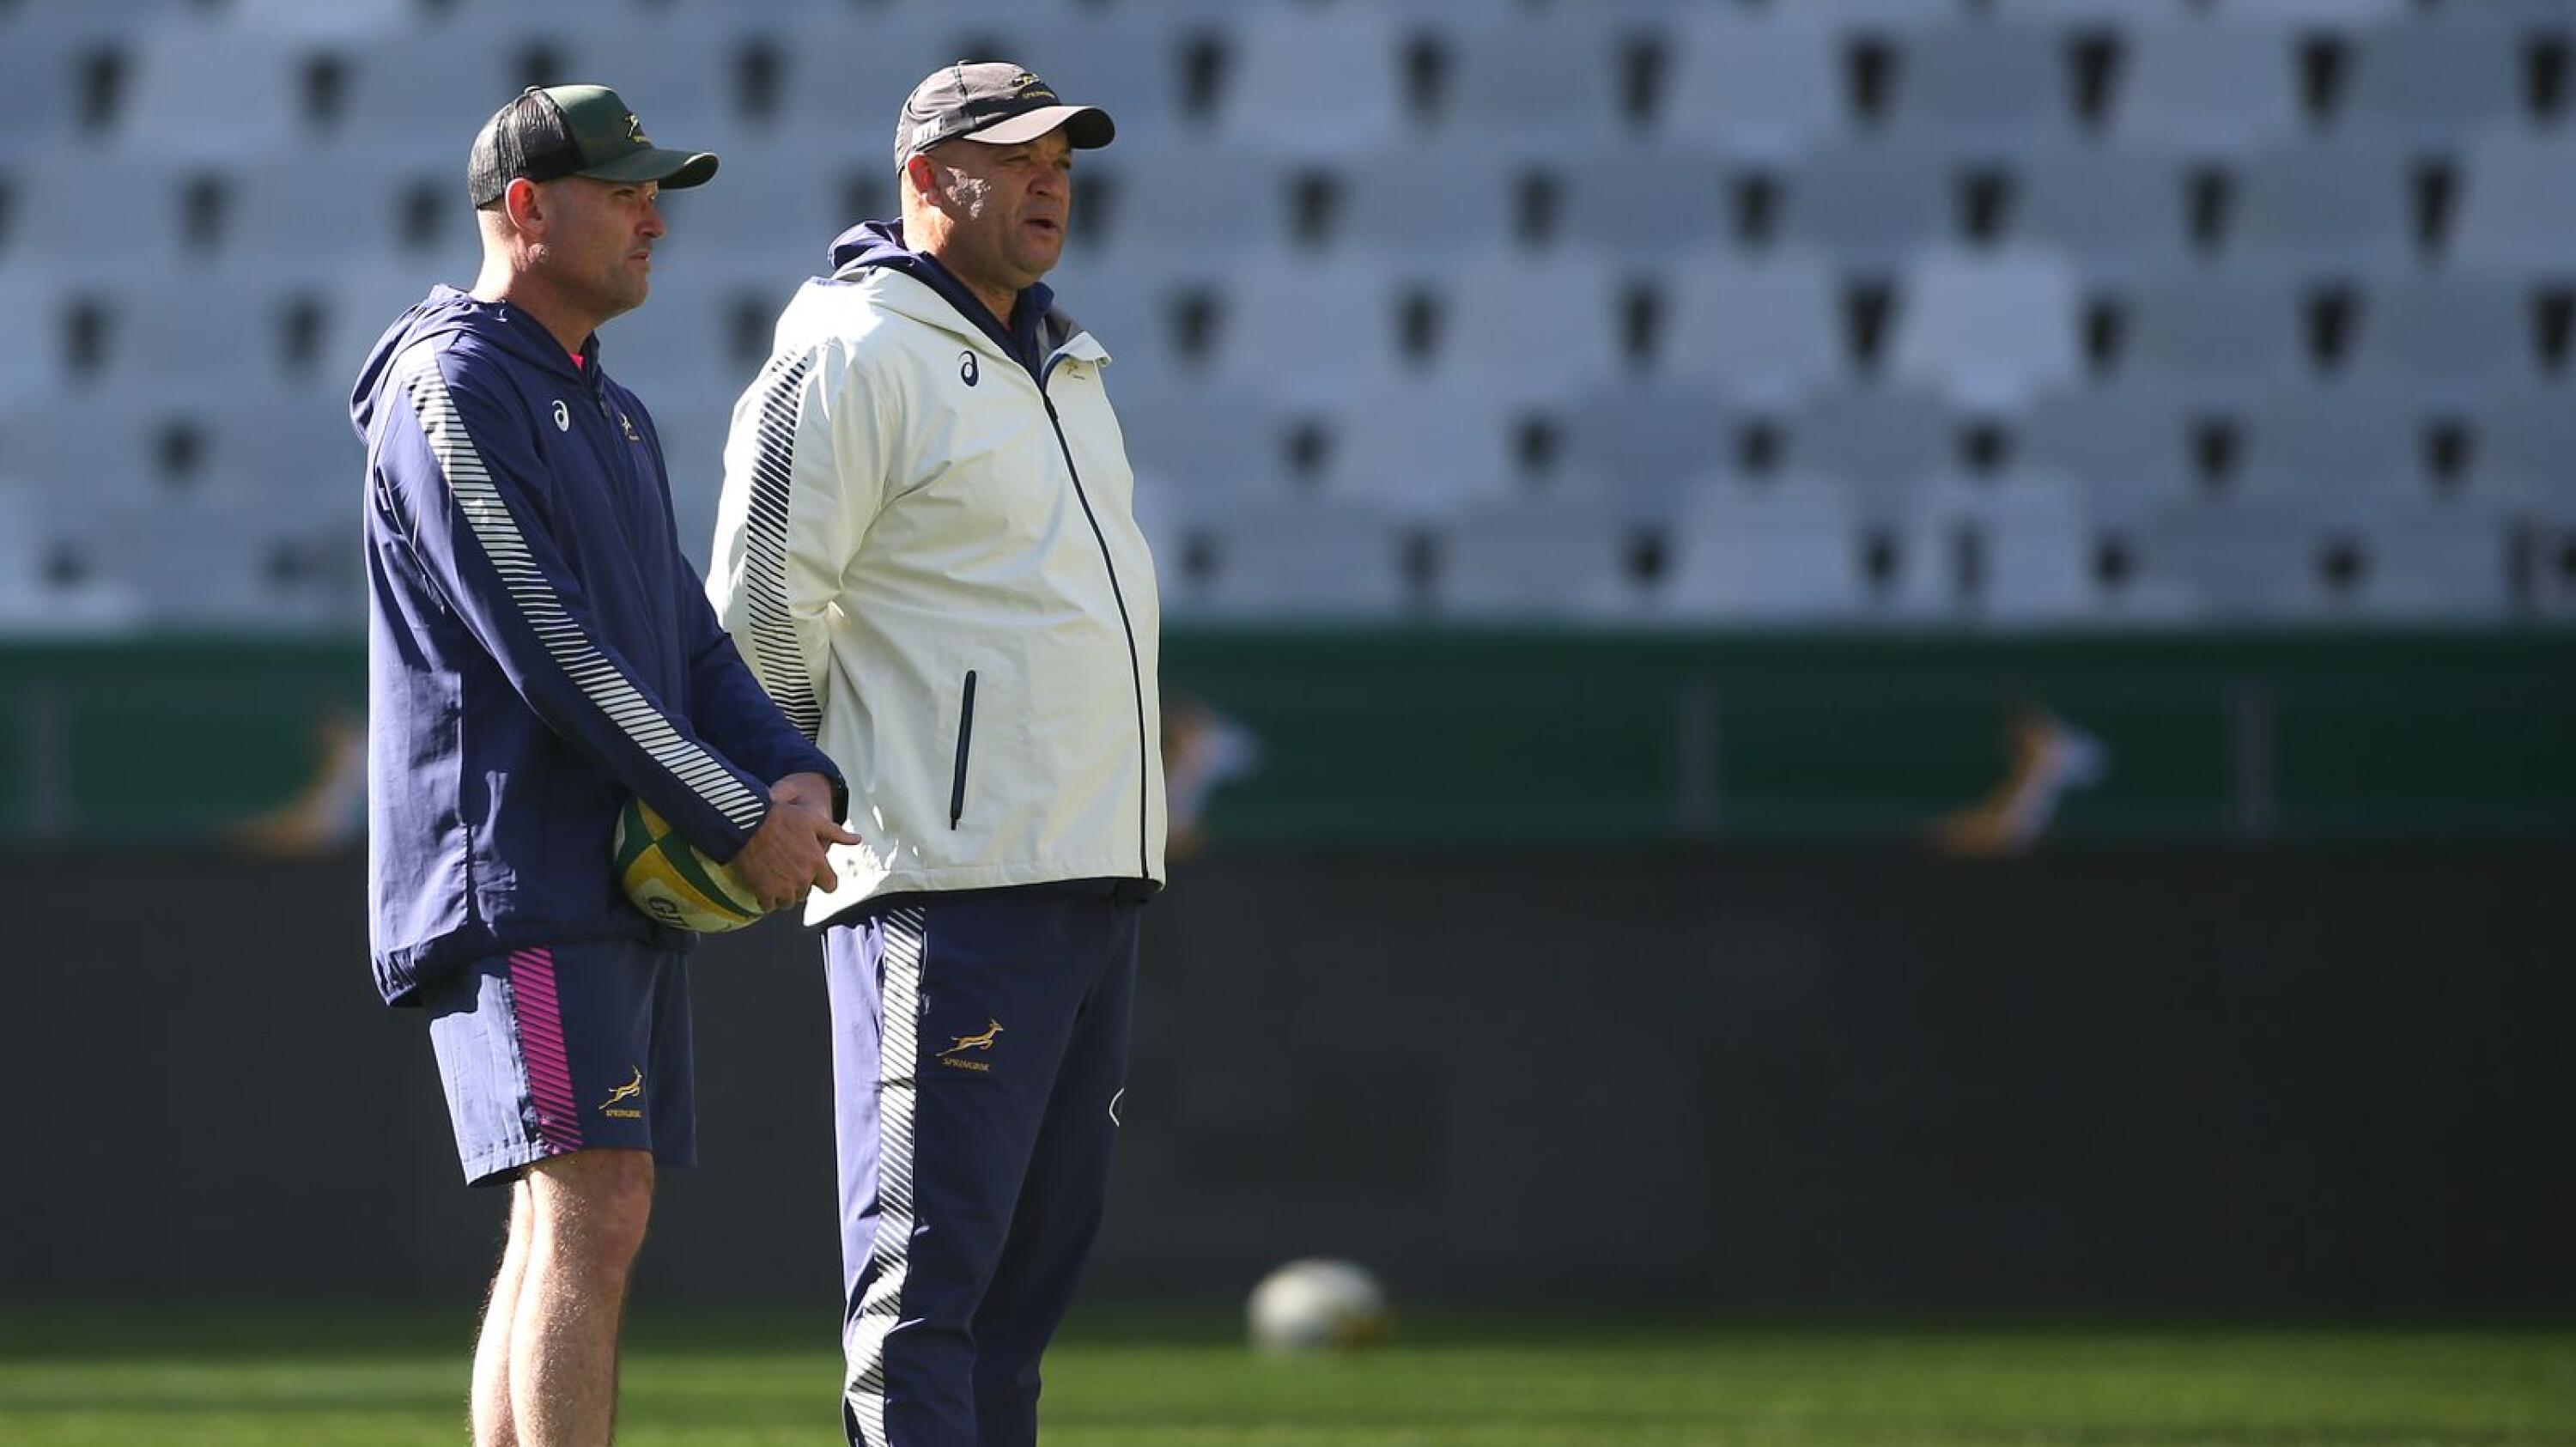 Springbok coach Jacques Nienaber with assistant coach Deon Davids during a training session in Cape Town